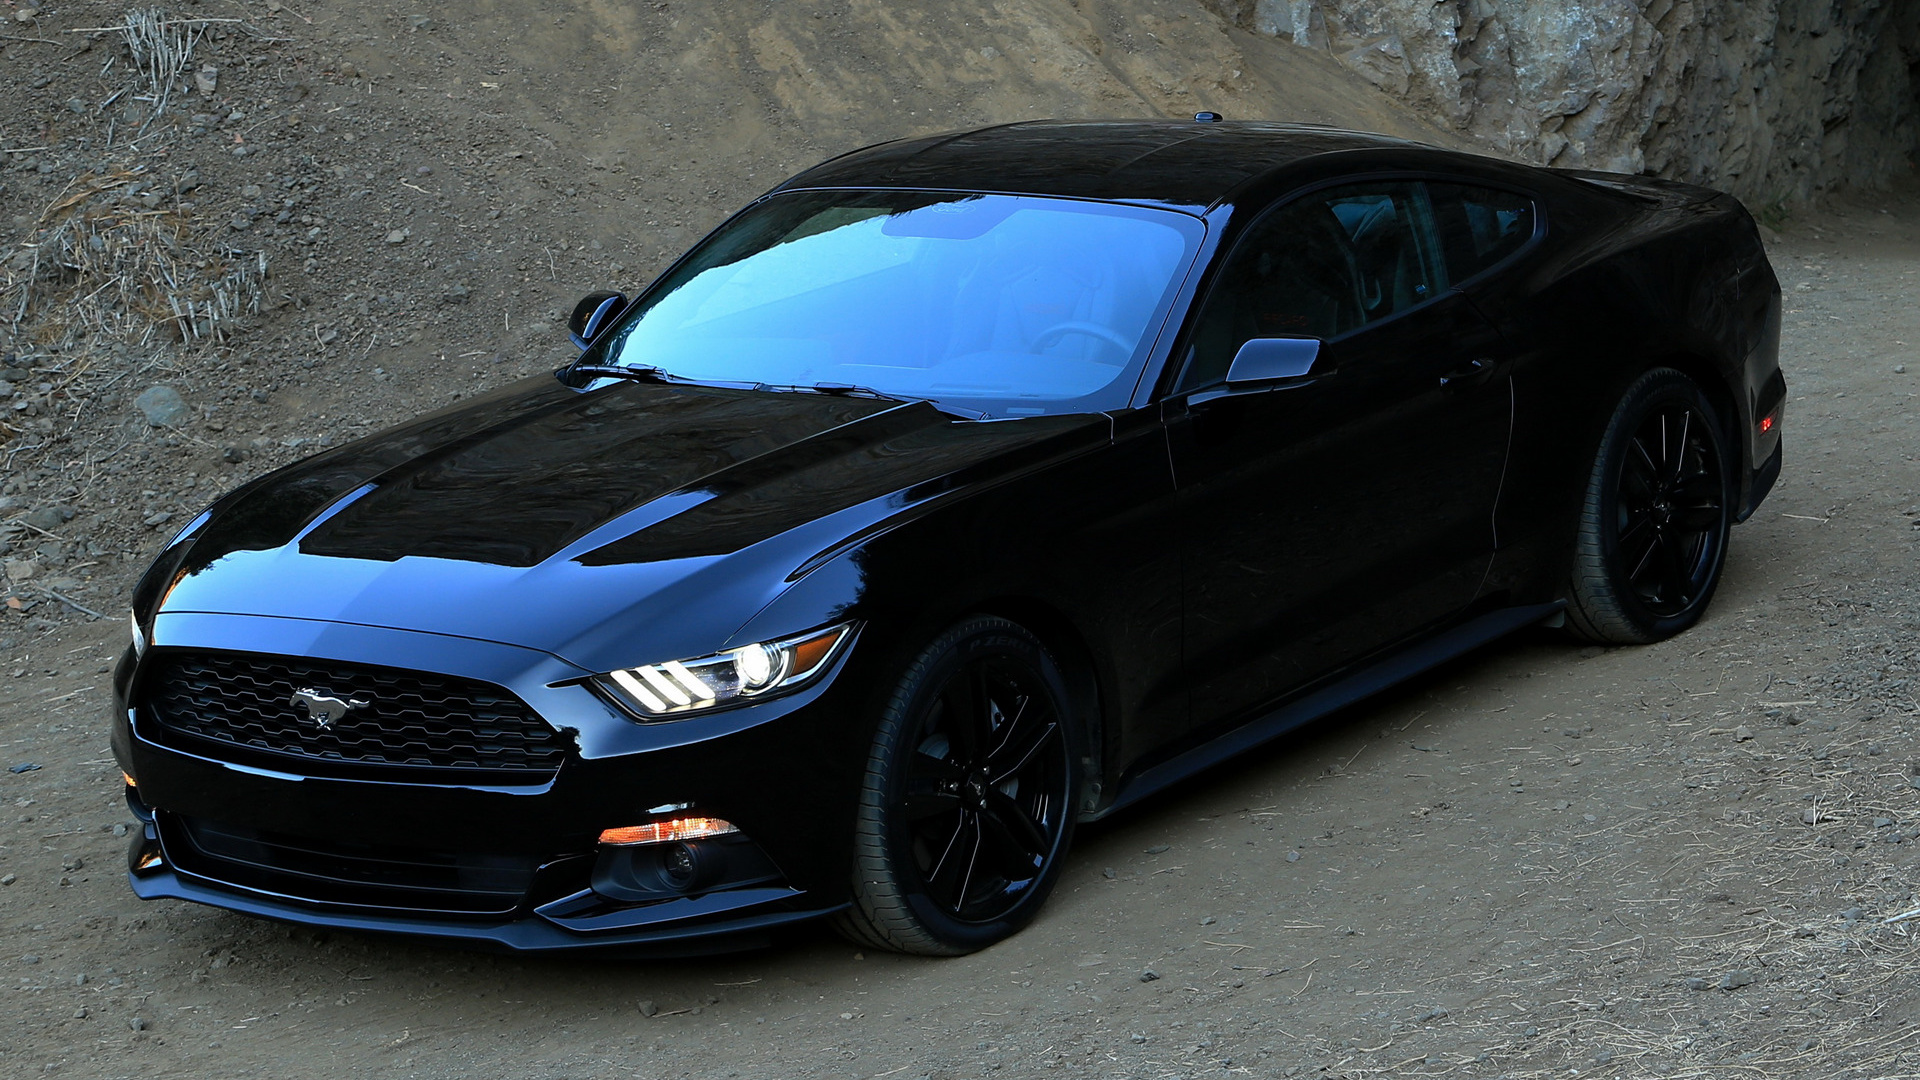 2015 Ford Mustang - Wallpapers and HD Images | Car Pixel
 2015 Ford Mustang Wallpaper Hd